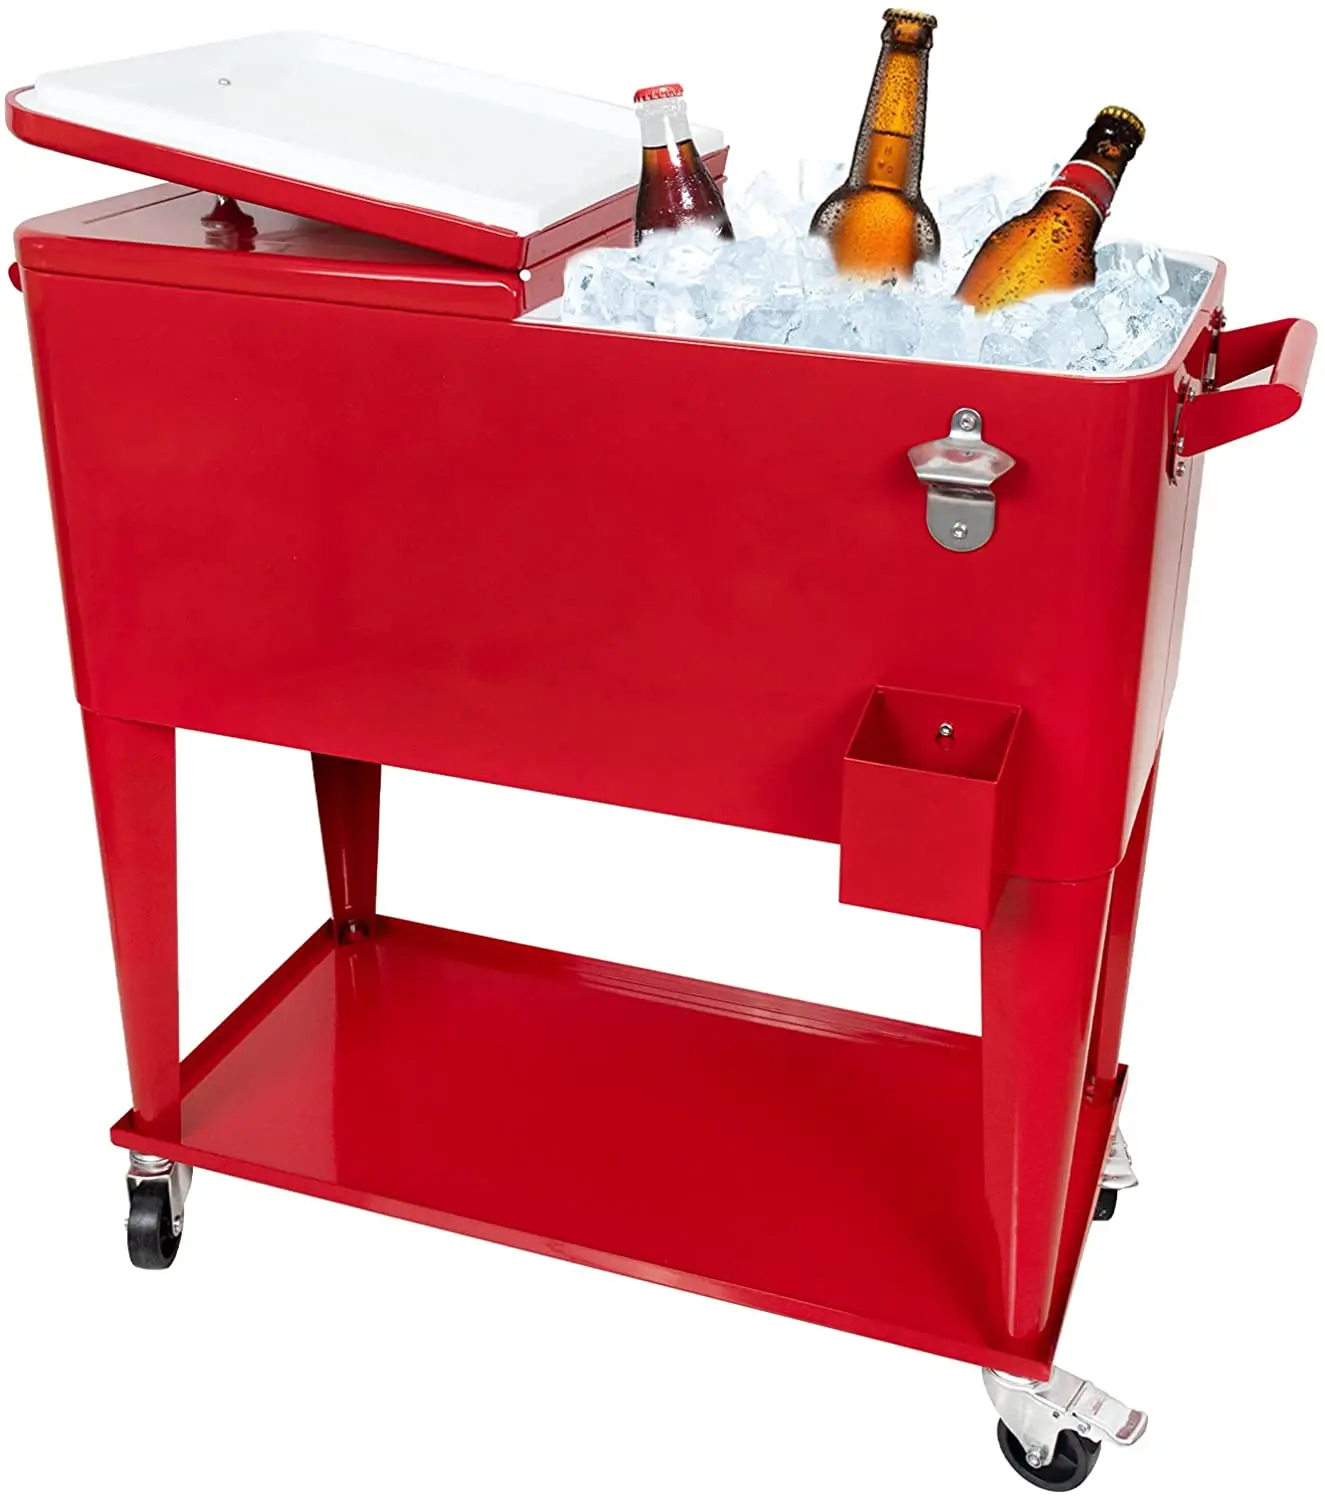 

Free Shipping in the U.S. Portable Rolling Storage Cooler Cart Trolley Iron Beer Cooler Cart with Large Storage Space, Red